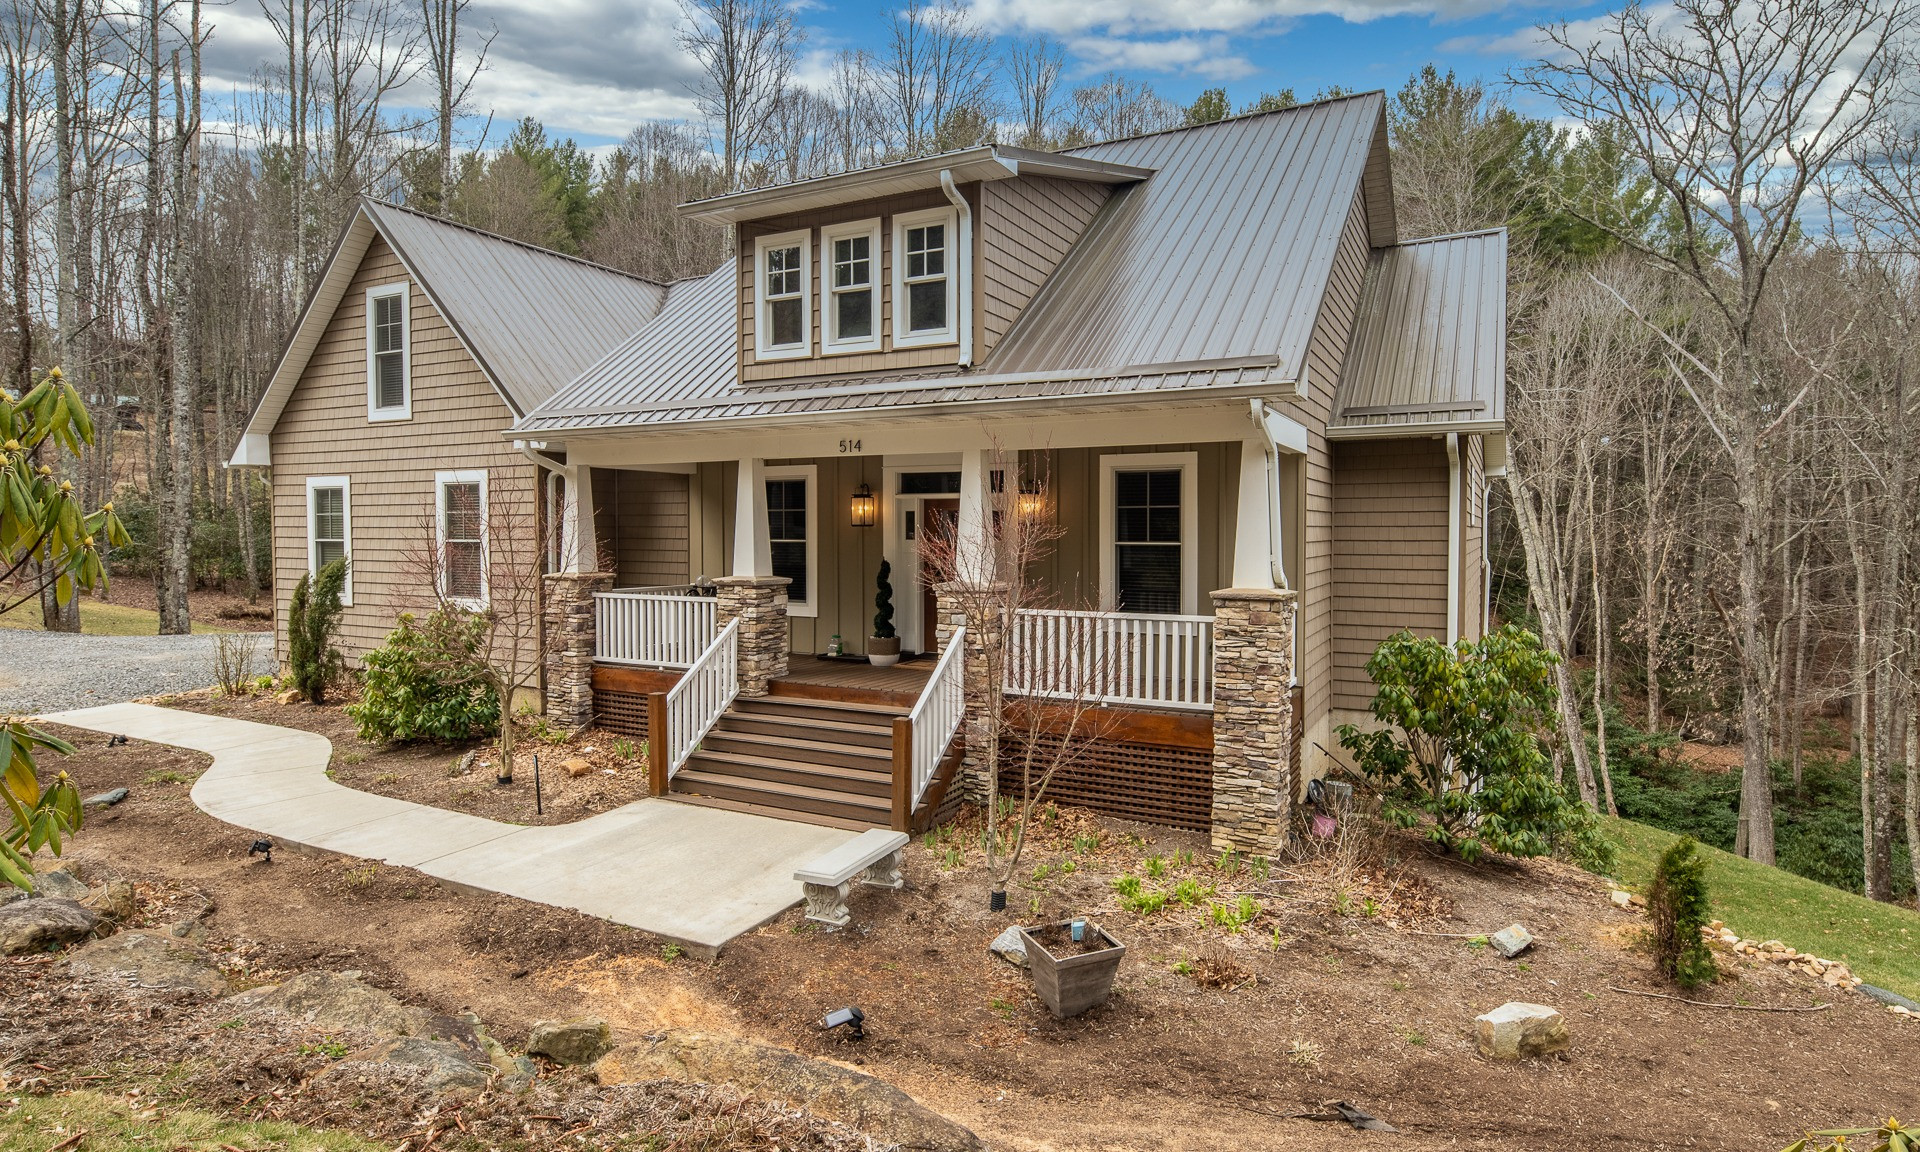 Designed and built with full-time living in mind, you will appreciate the low maintenance exterior including metal roof, high quality vinyl shakes and Hardie Plank board & batten siding and Trex decking.